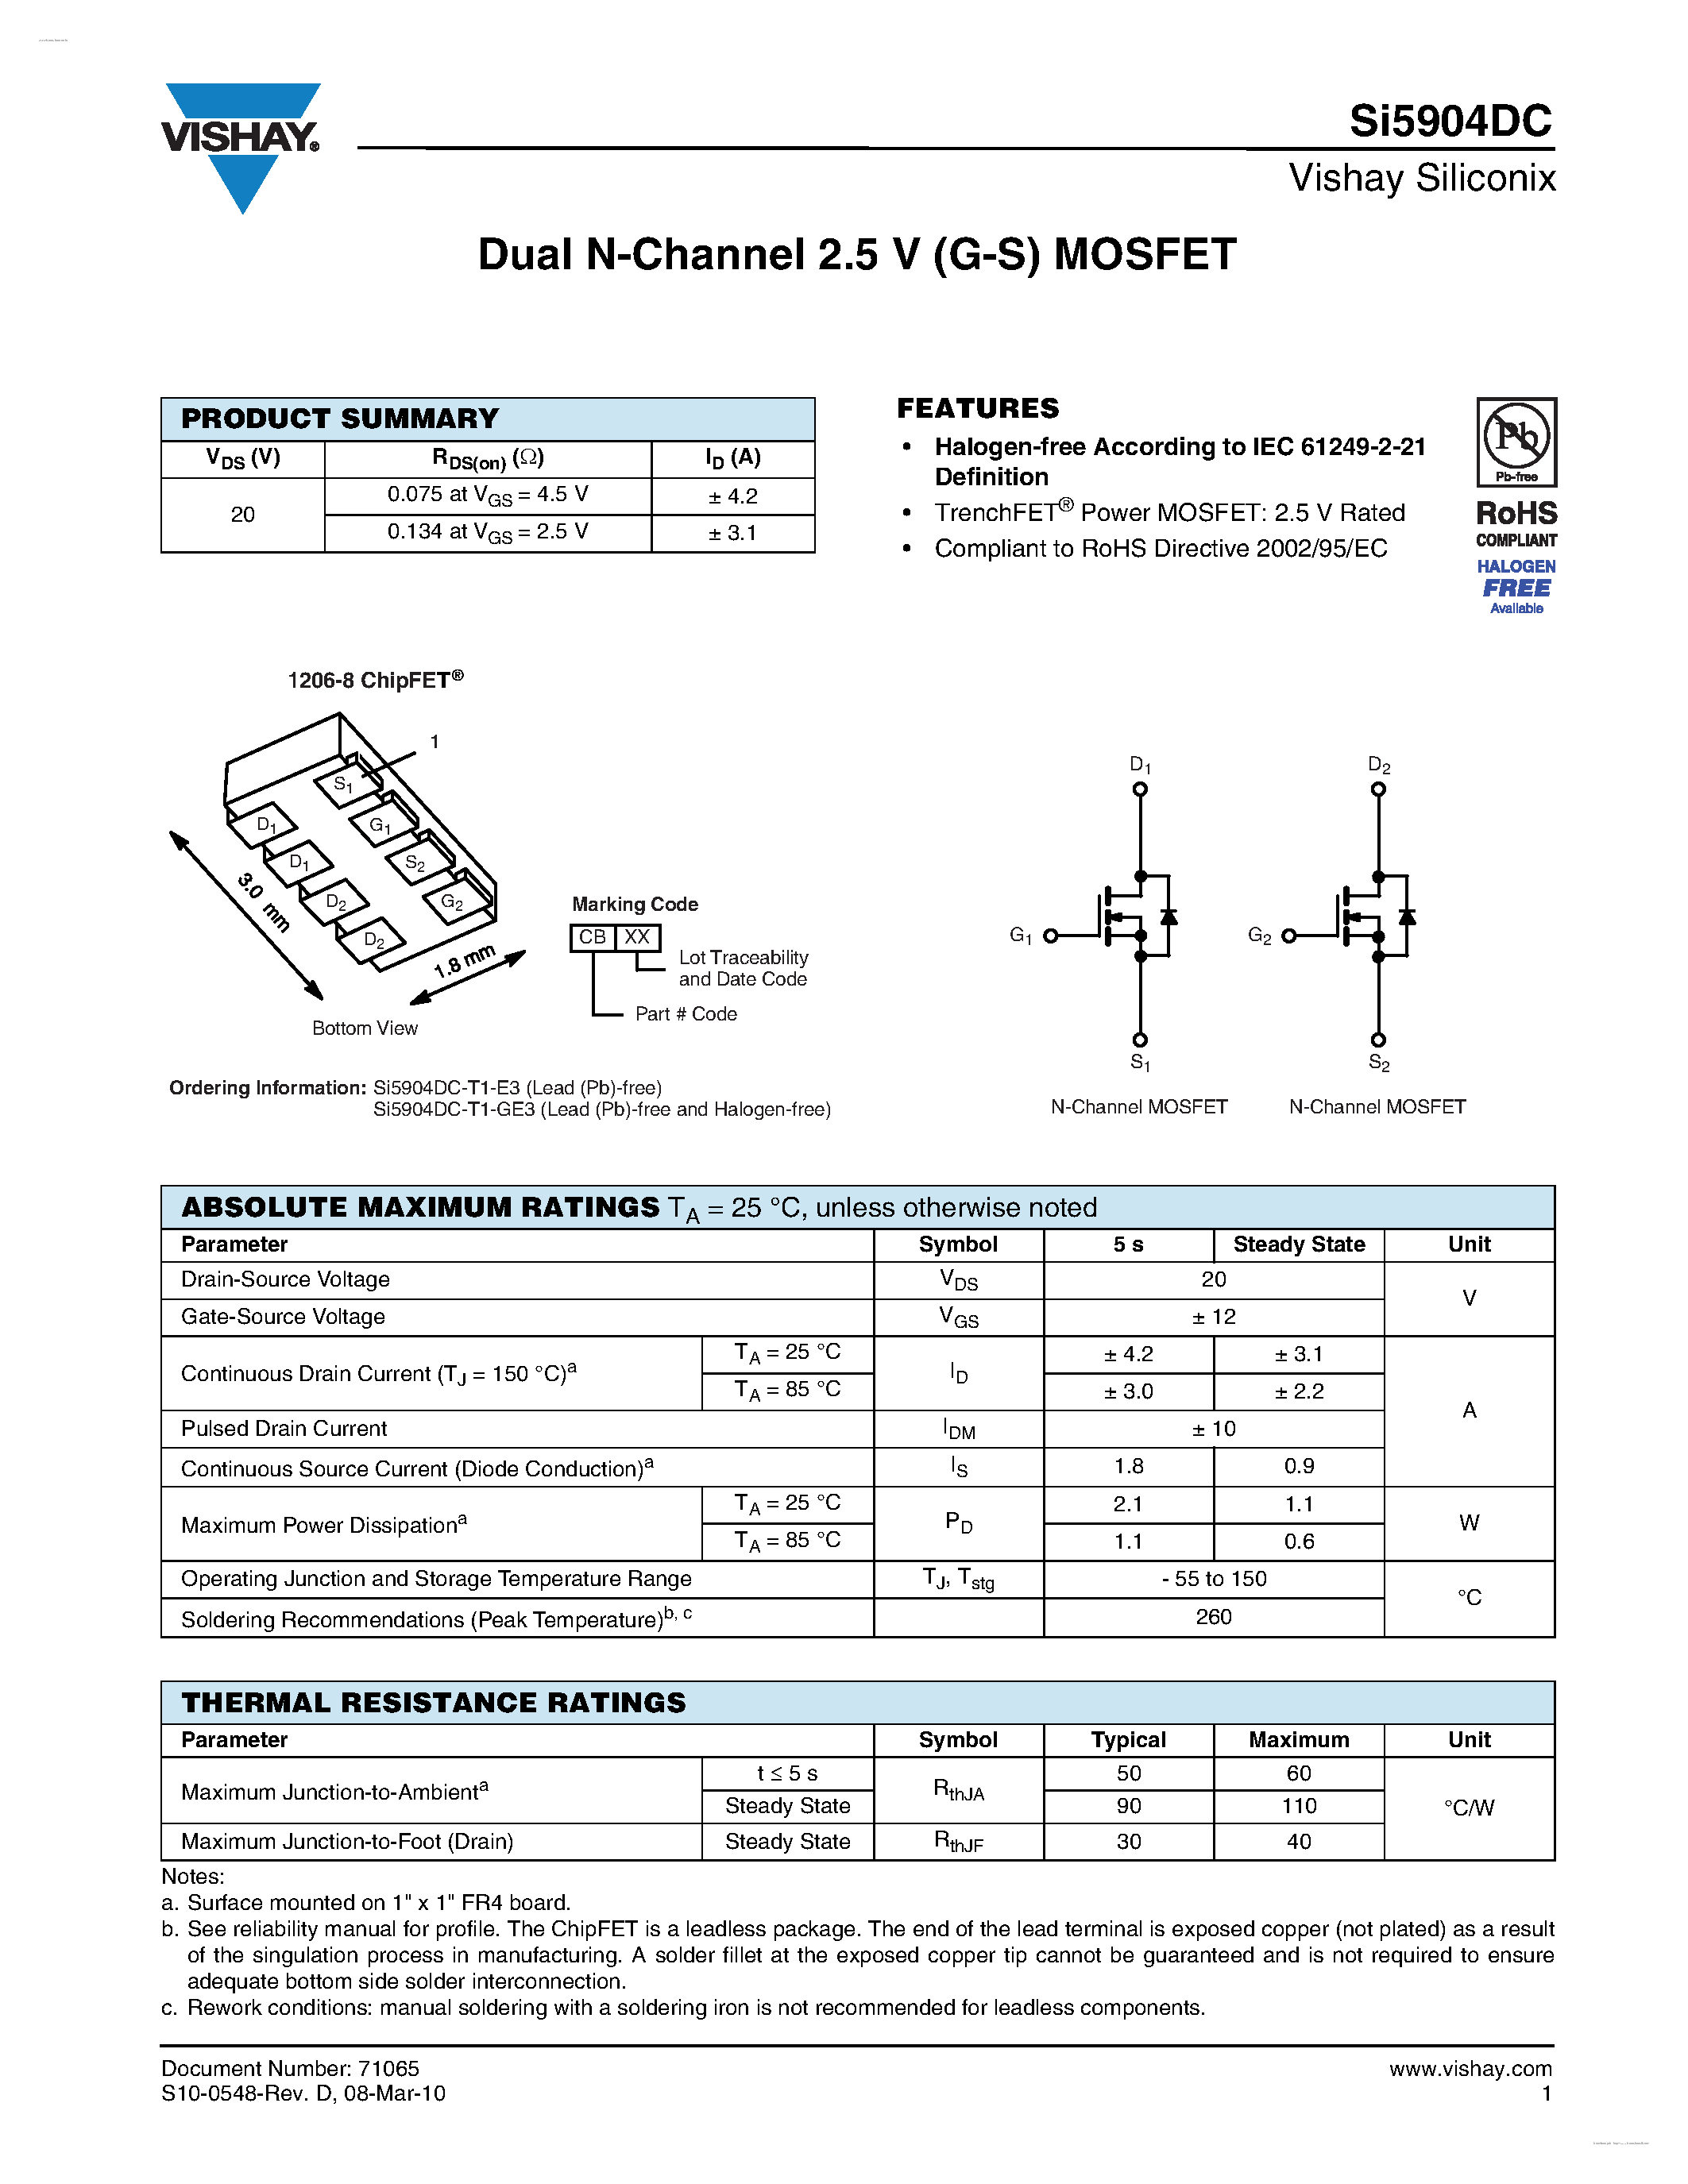 Datasheet SI5904DC - Dual N-Channel 2.5 V (G-S) MOSFET page 1